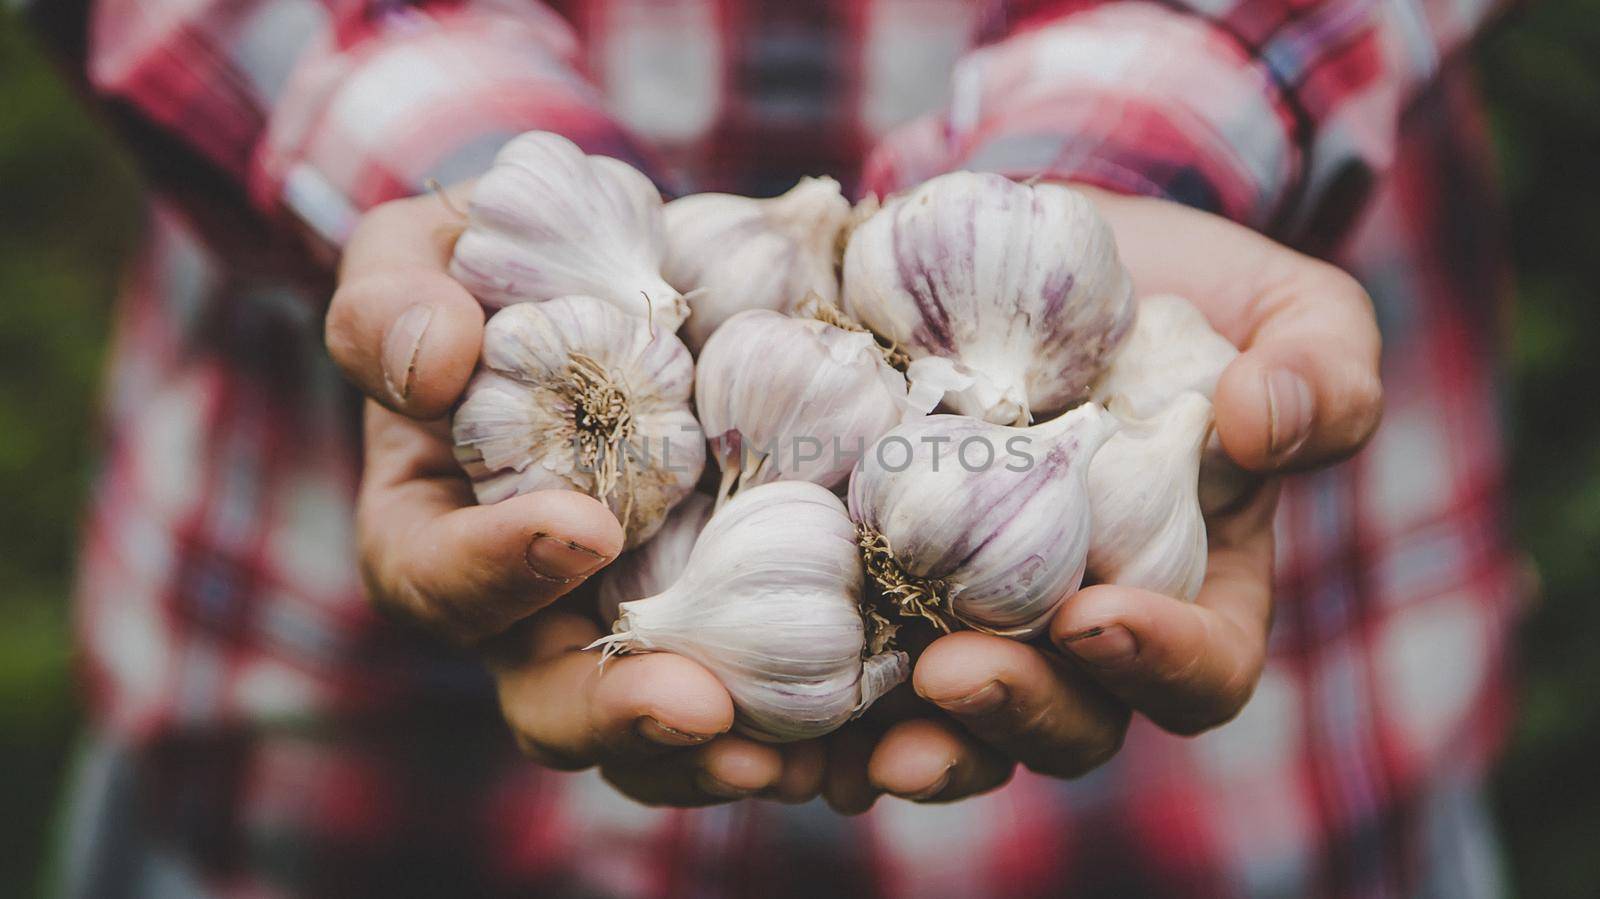 A man farmer holds a harvest of garlic in his hands. Selective focus. nature.